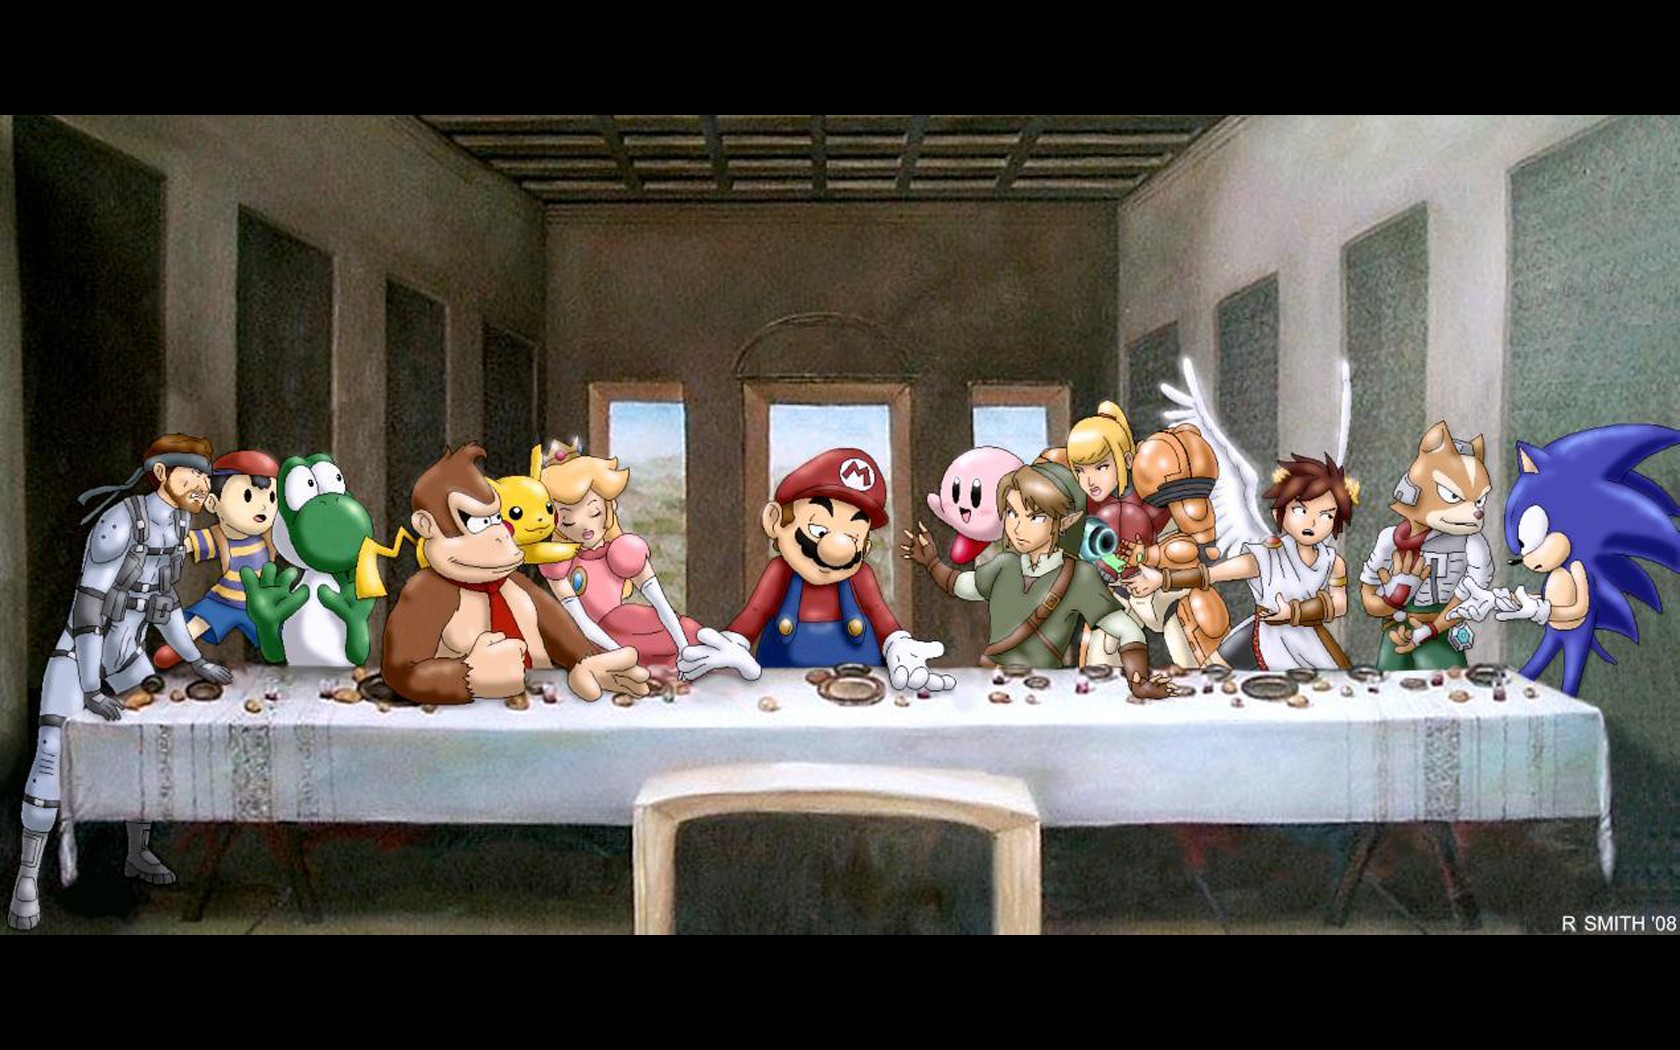 Digital Art Super Mario Sonic Kirby Painting The Legend Of Zelda Table The Last Supper Parody Link S 1680x1050